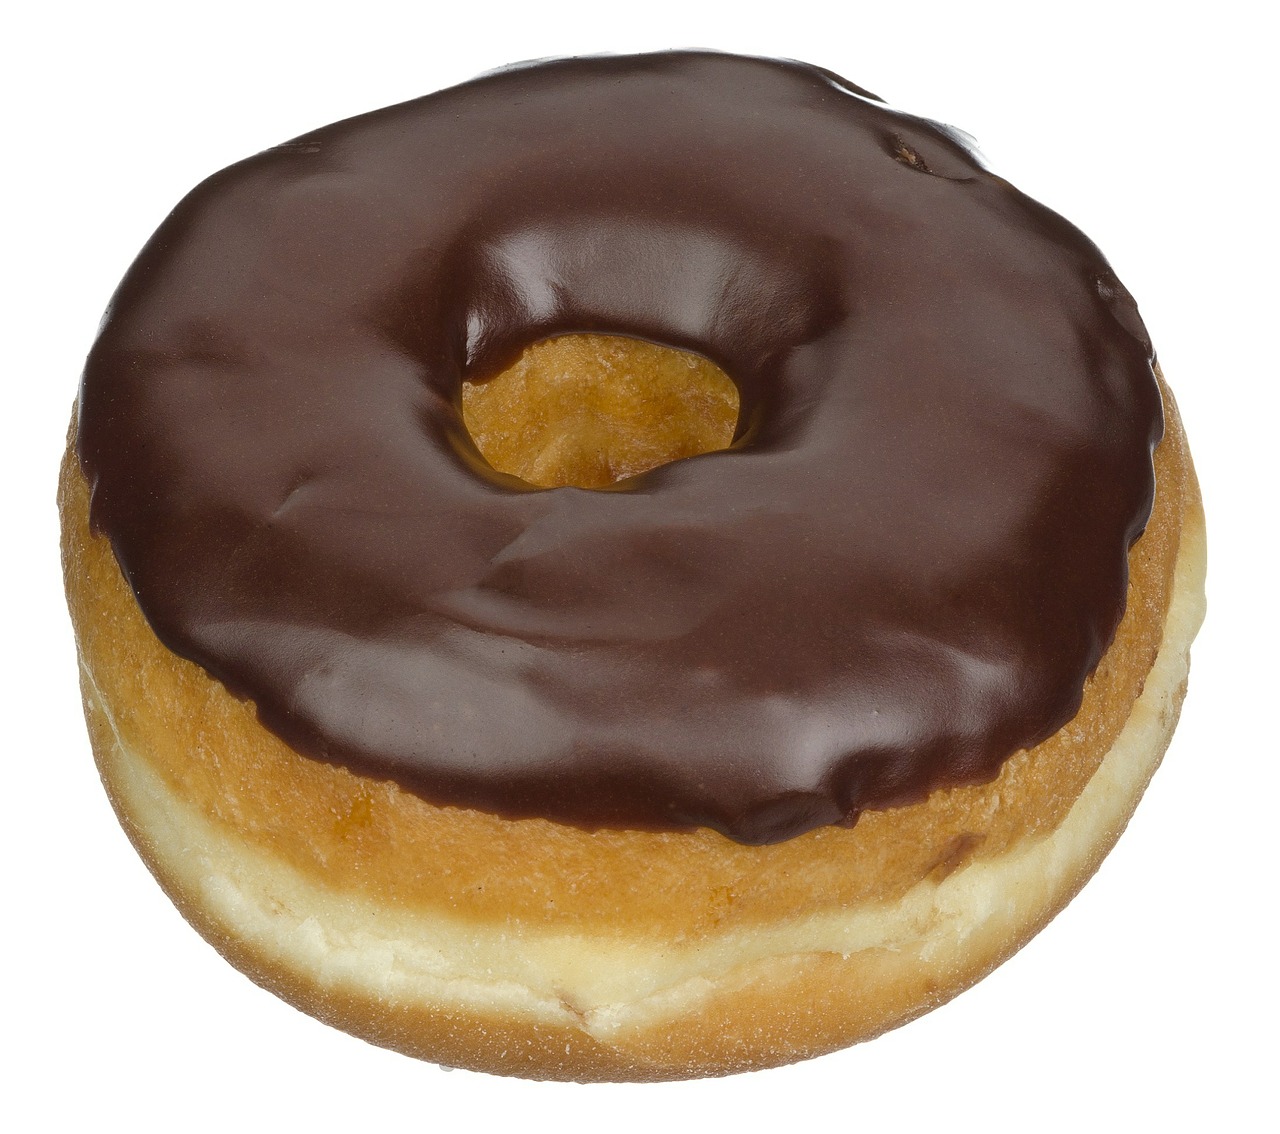 Download Free Photo Of Donut Doughnut Chocolate Frosting Snack Dunkin Donuts From